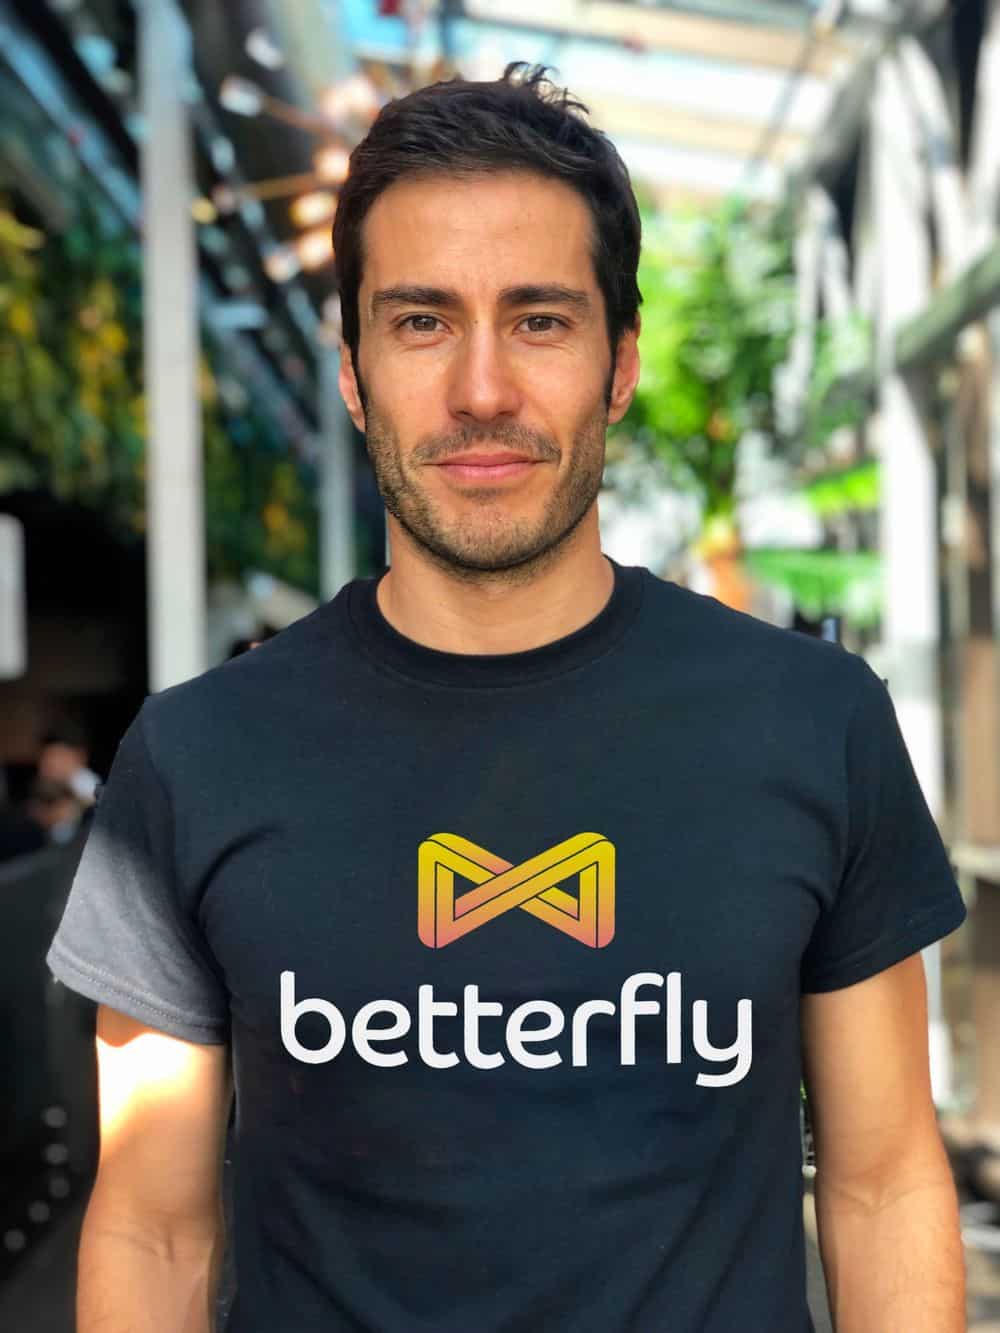 Betterfly SoftBank invests in Betterfly in a Funding Round